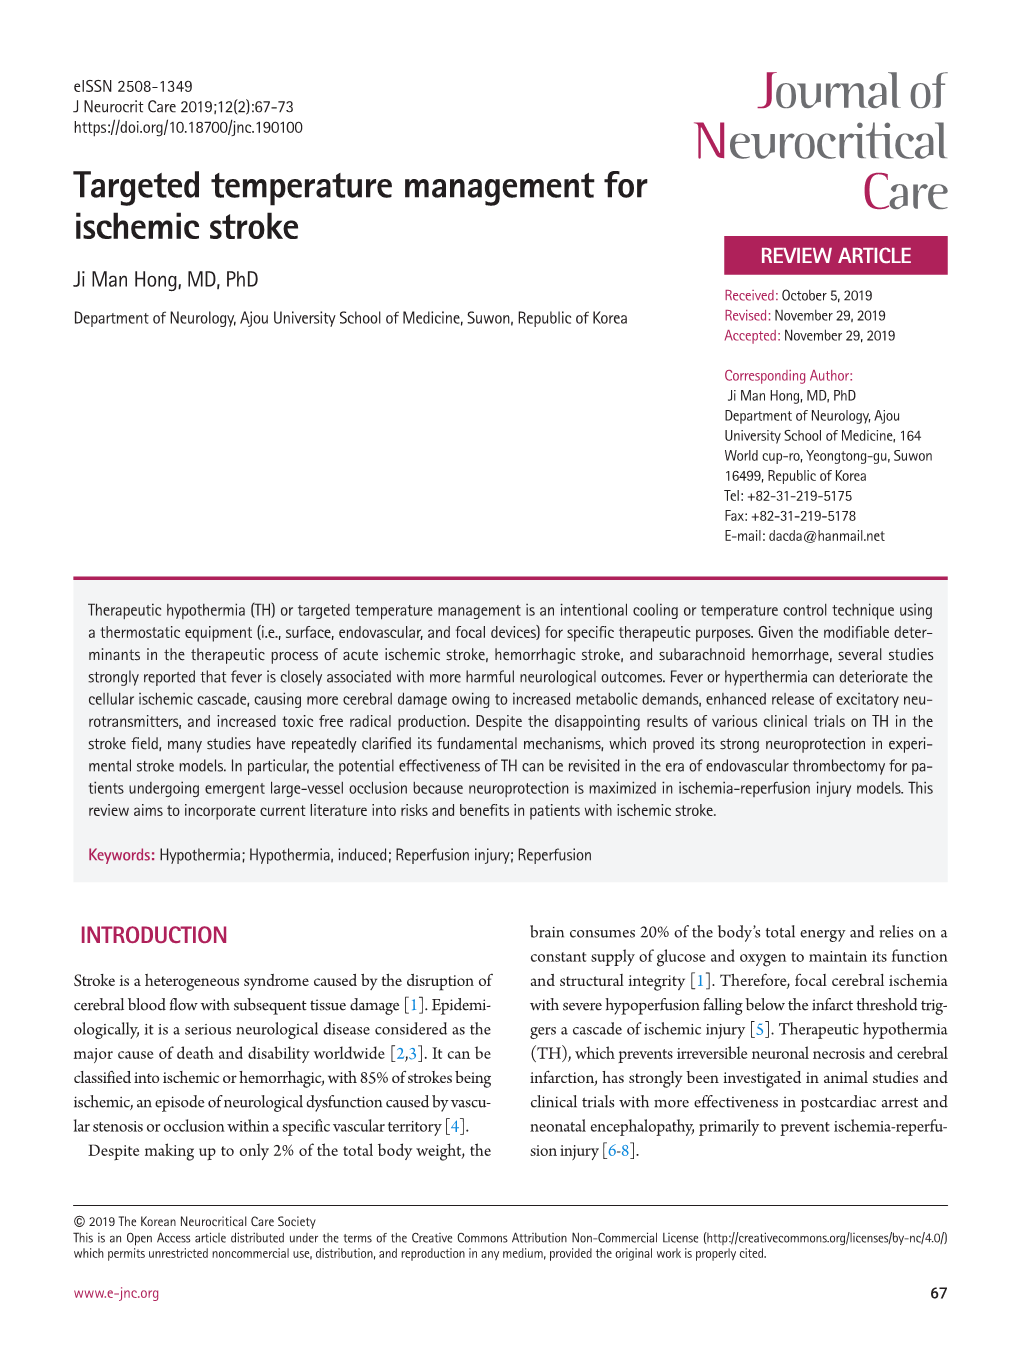 Targeted Temperature Management for Ischemic Stroke